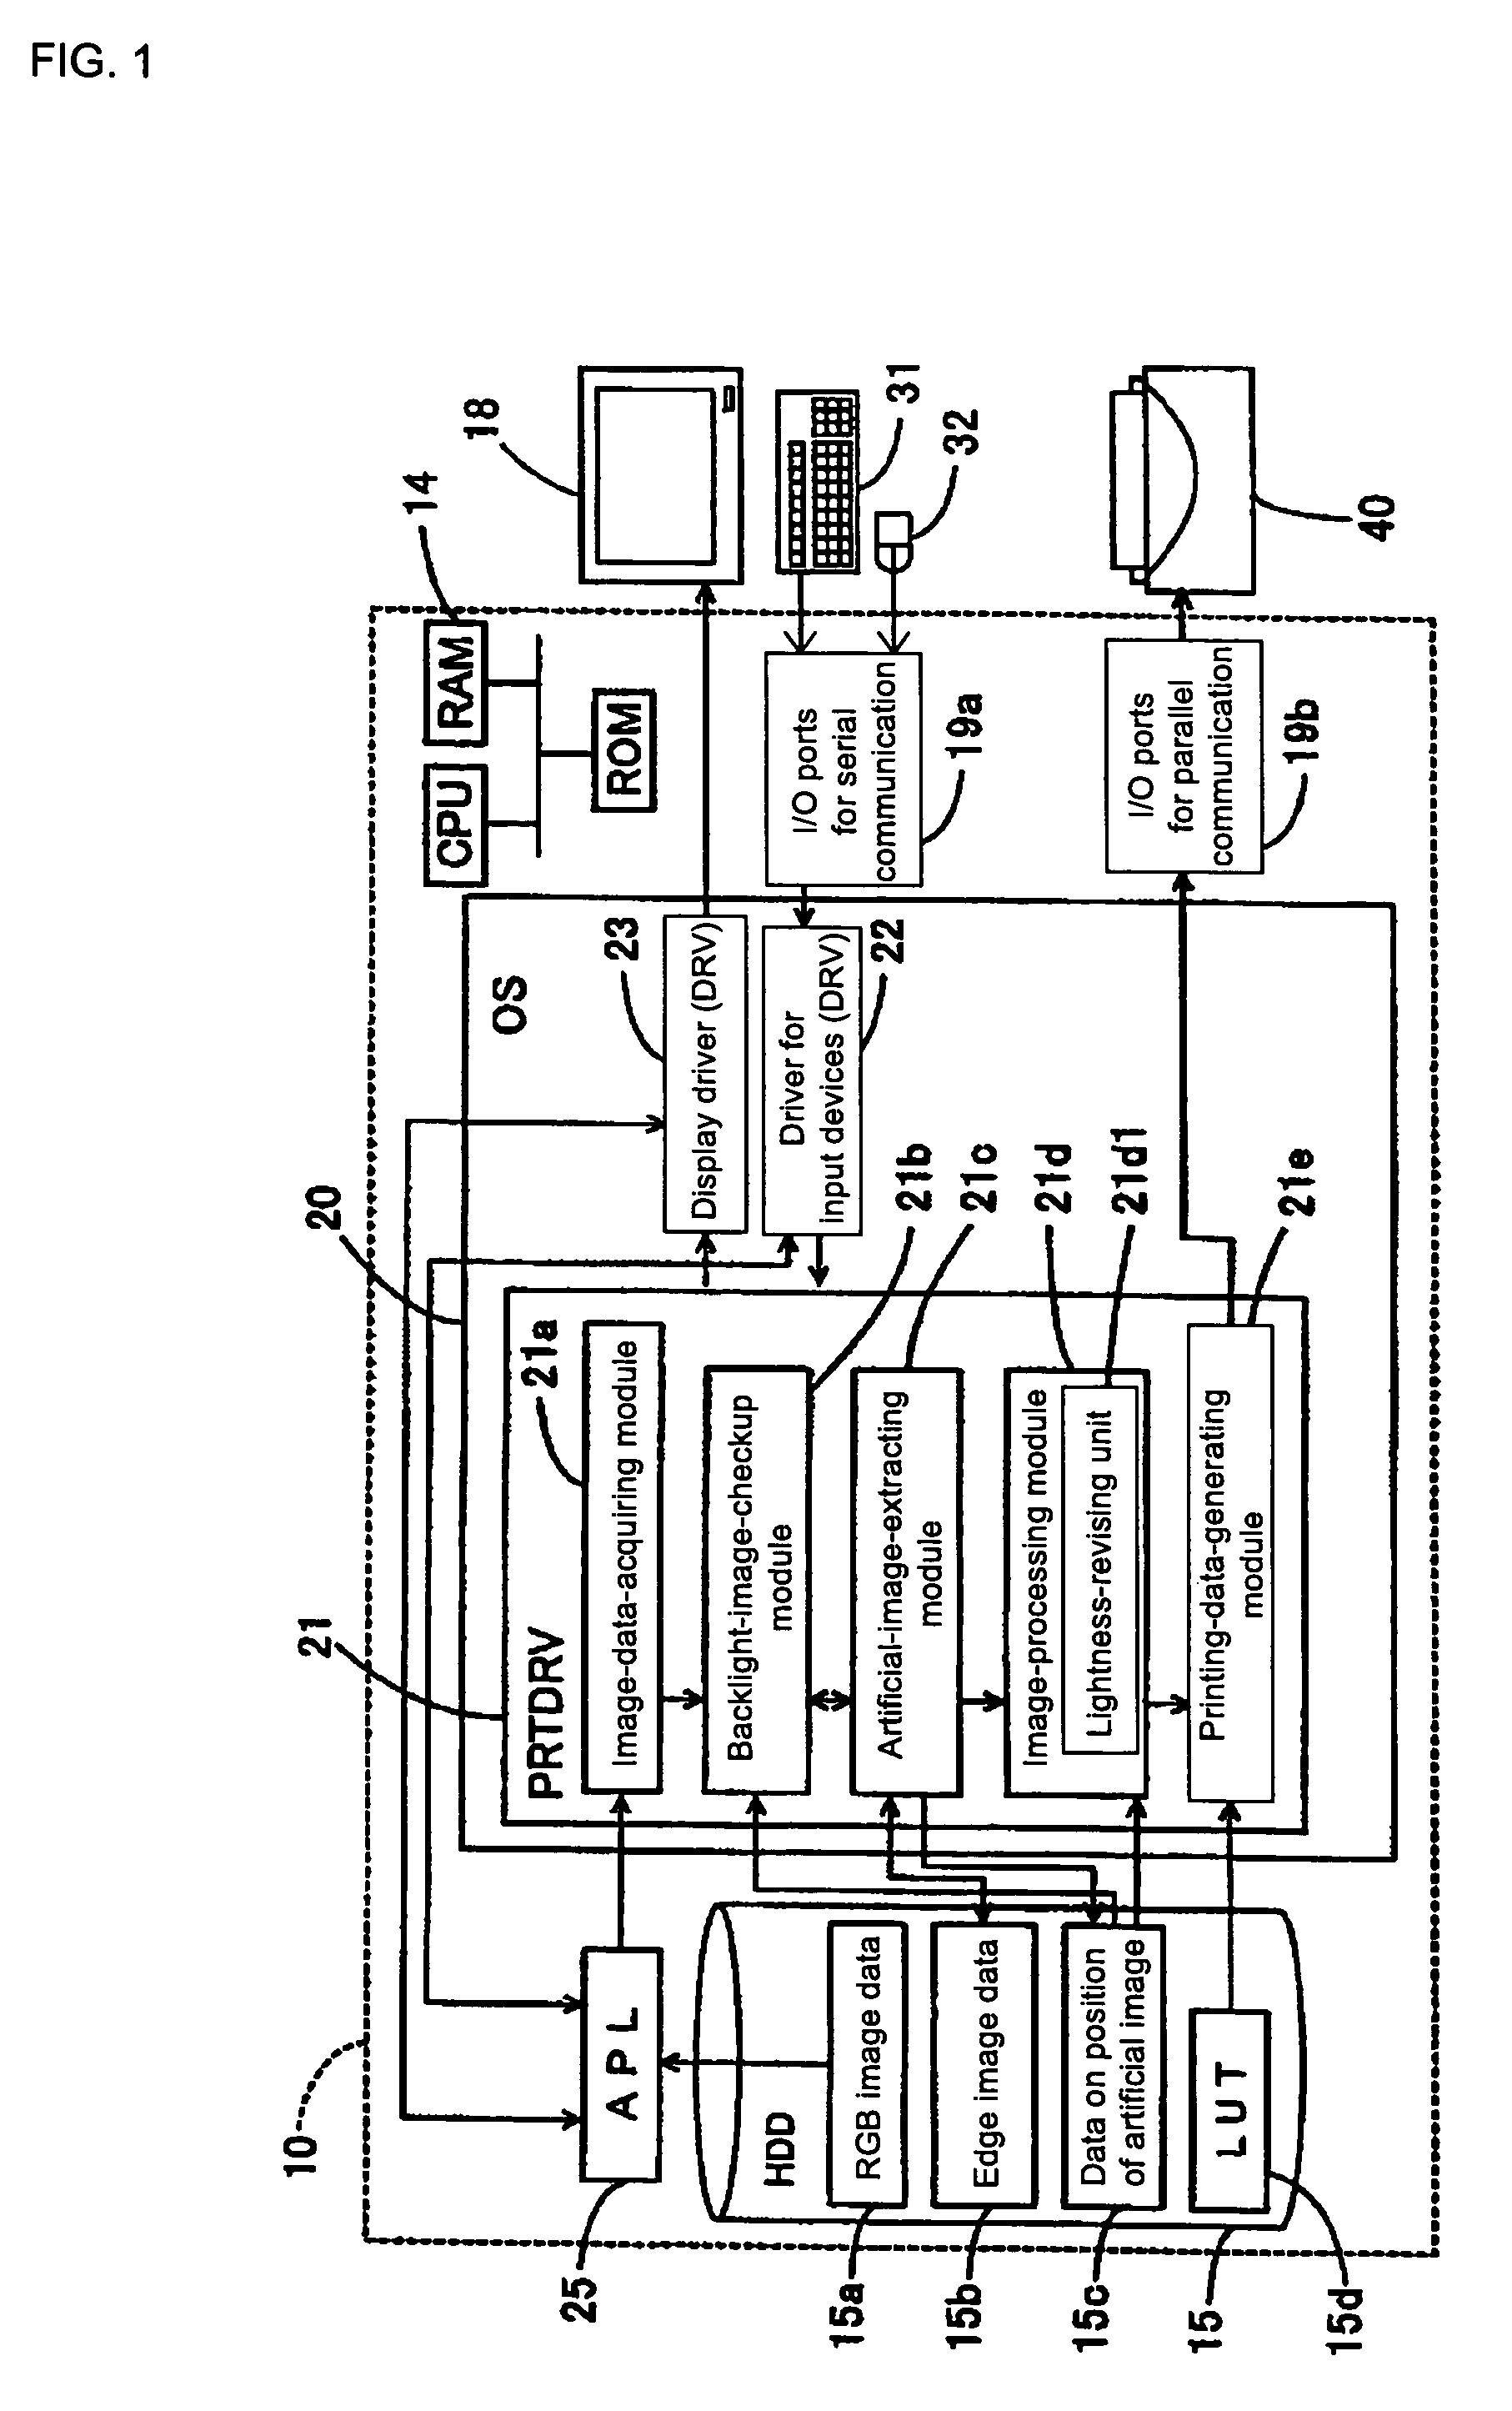 Method, apparatus, and computer-readable medium for processing an image while excluding a portion of the image